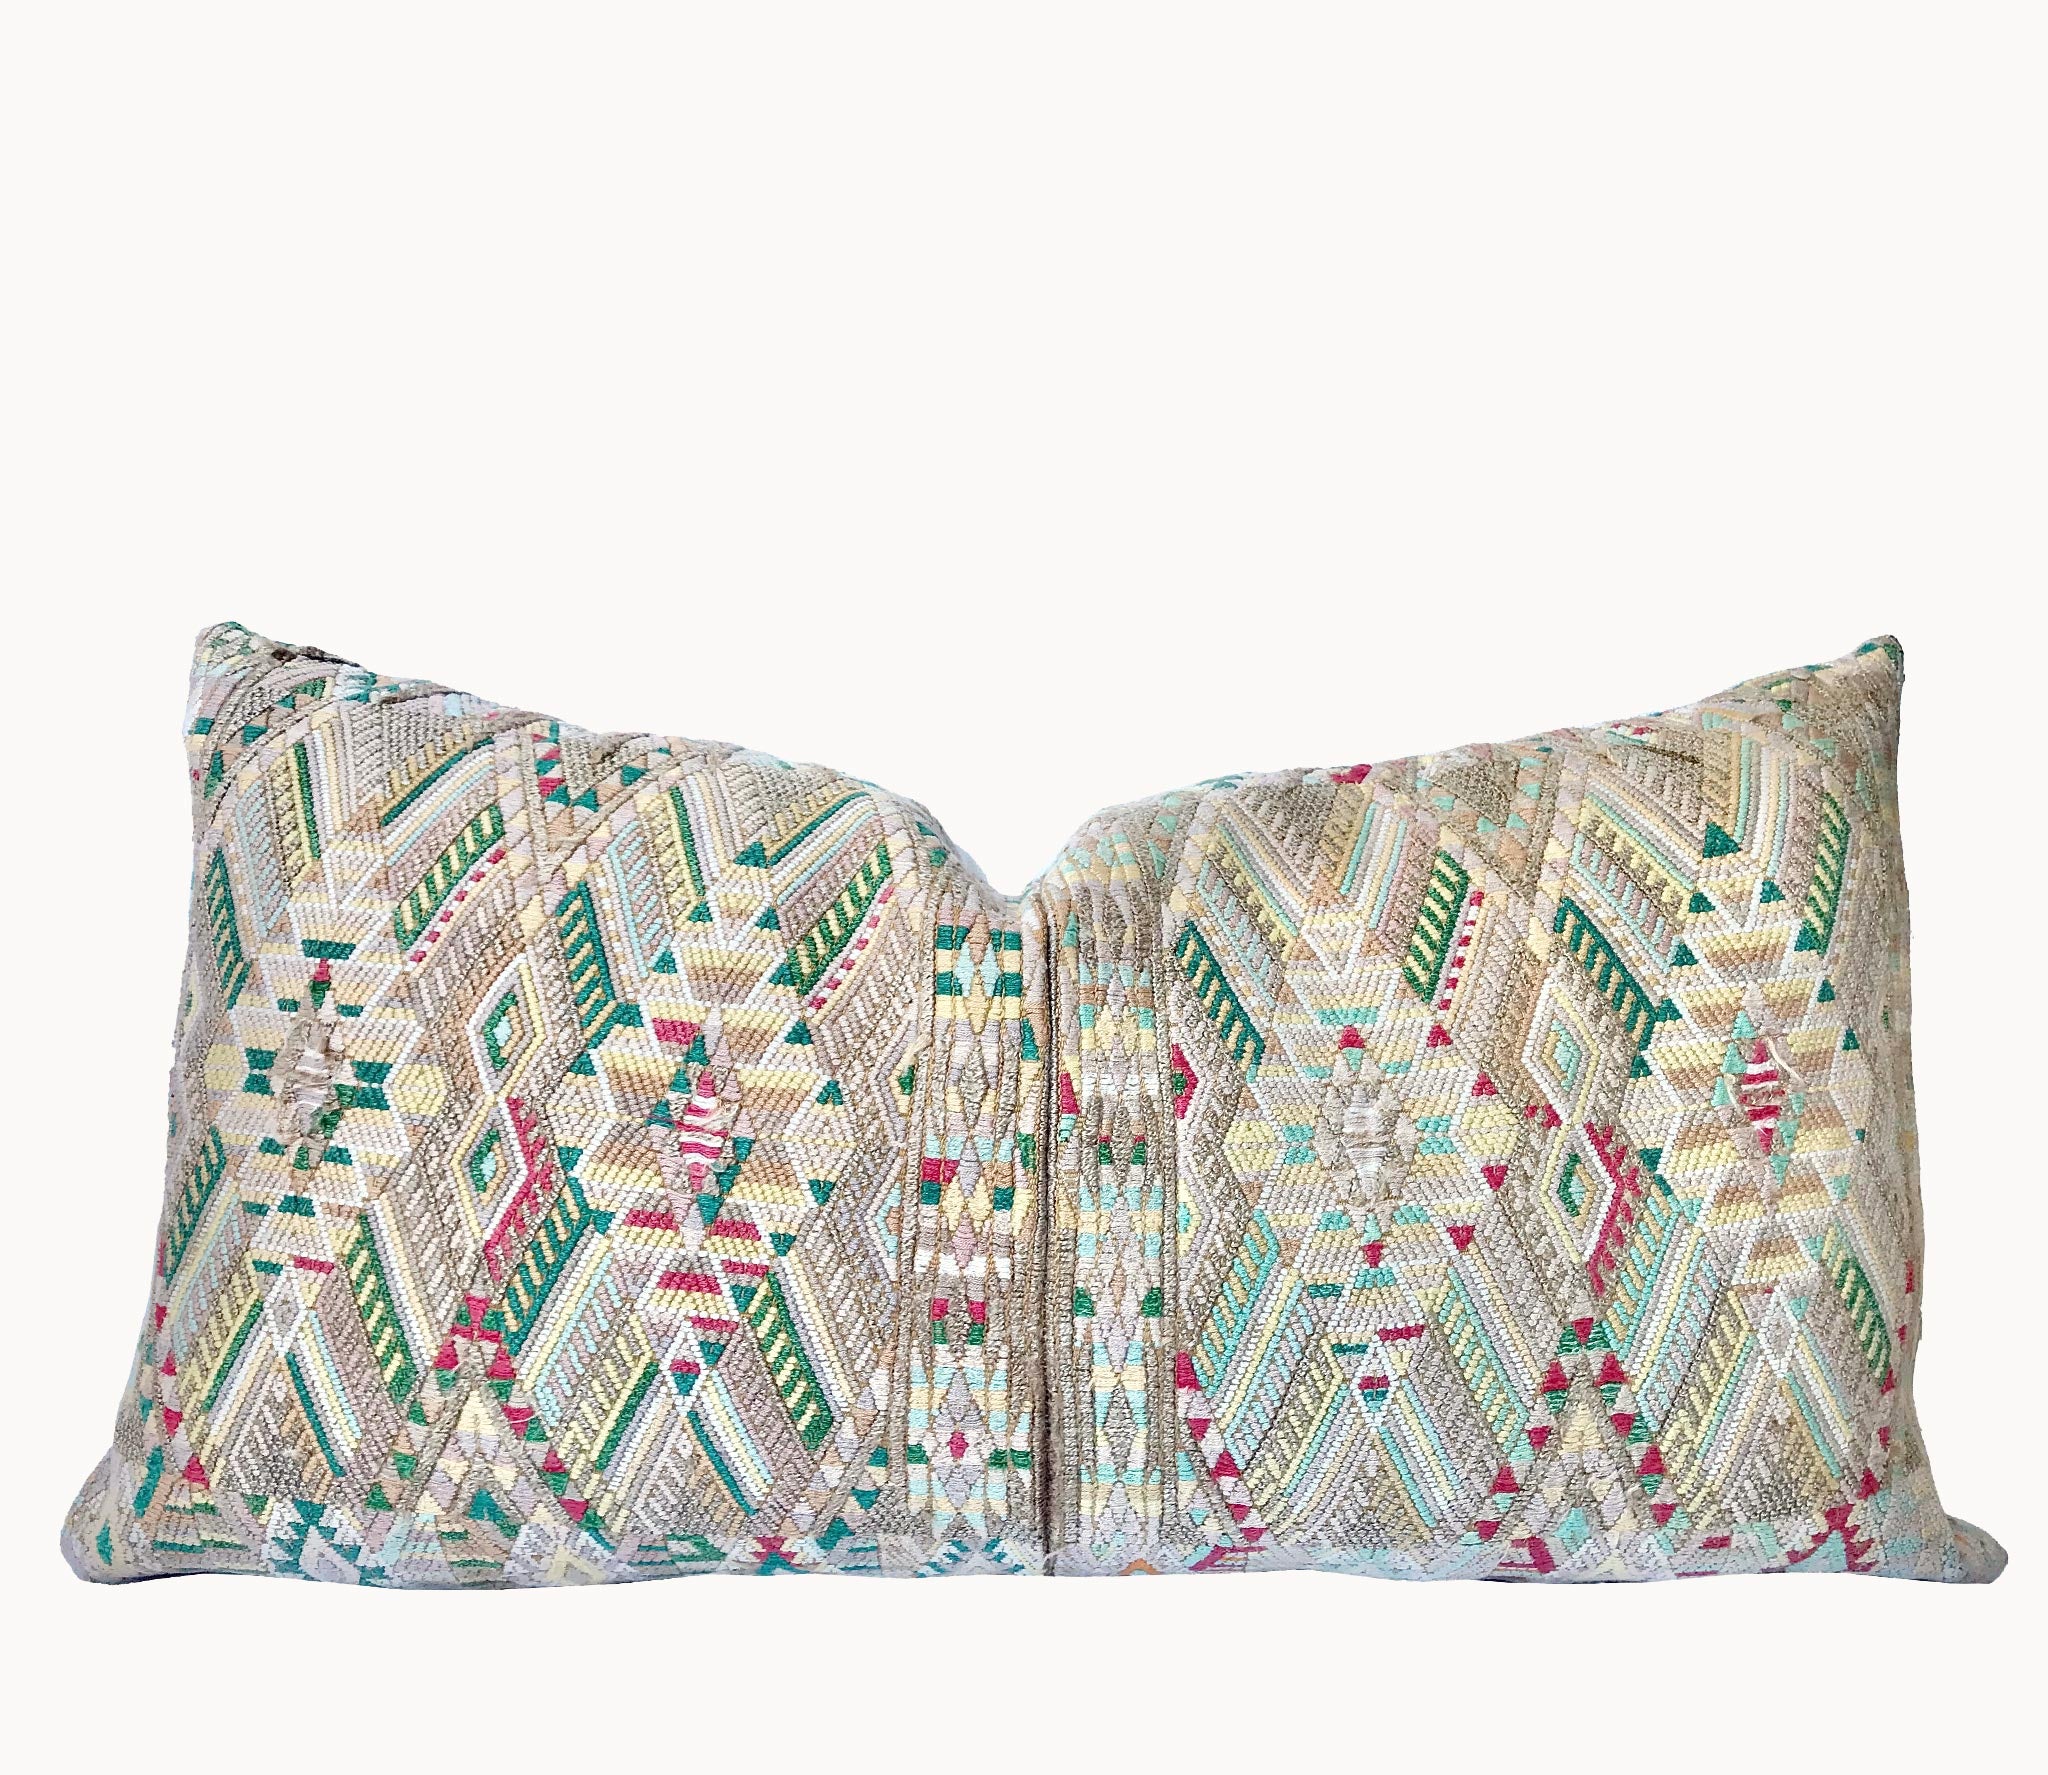 Guatemalan embroidered huipil pillow. Geometric chevron pattern in beige.